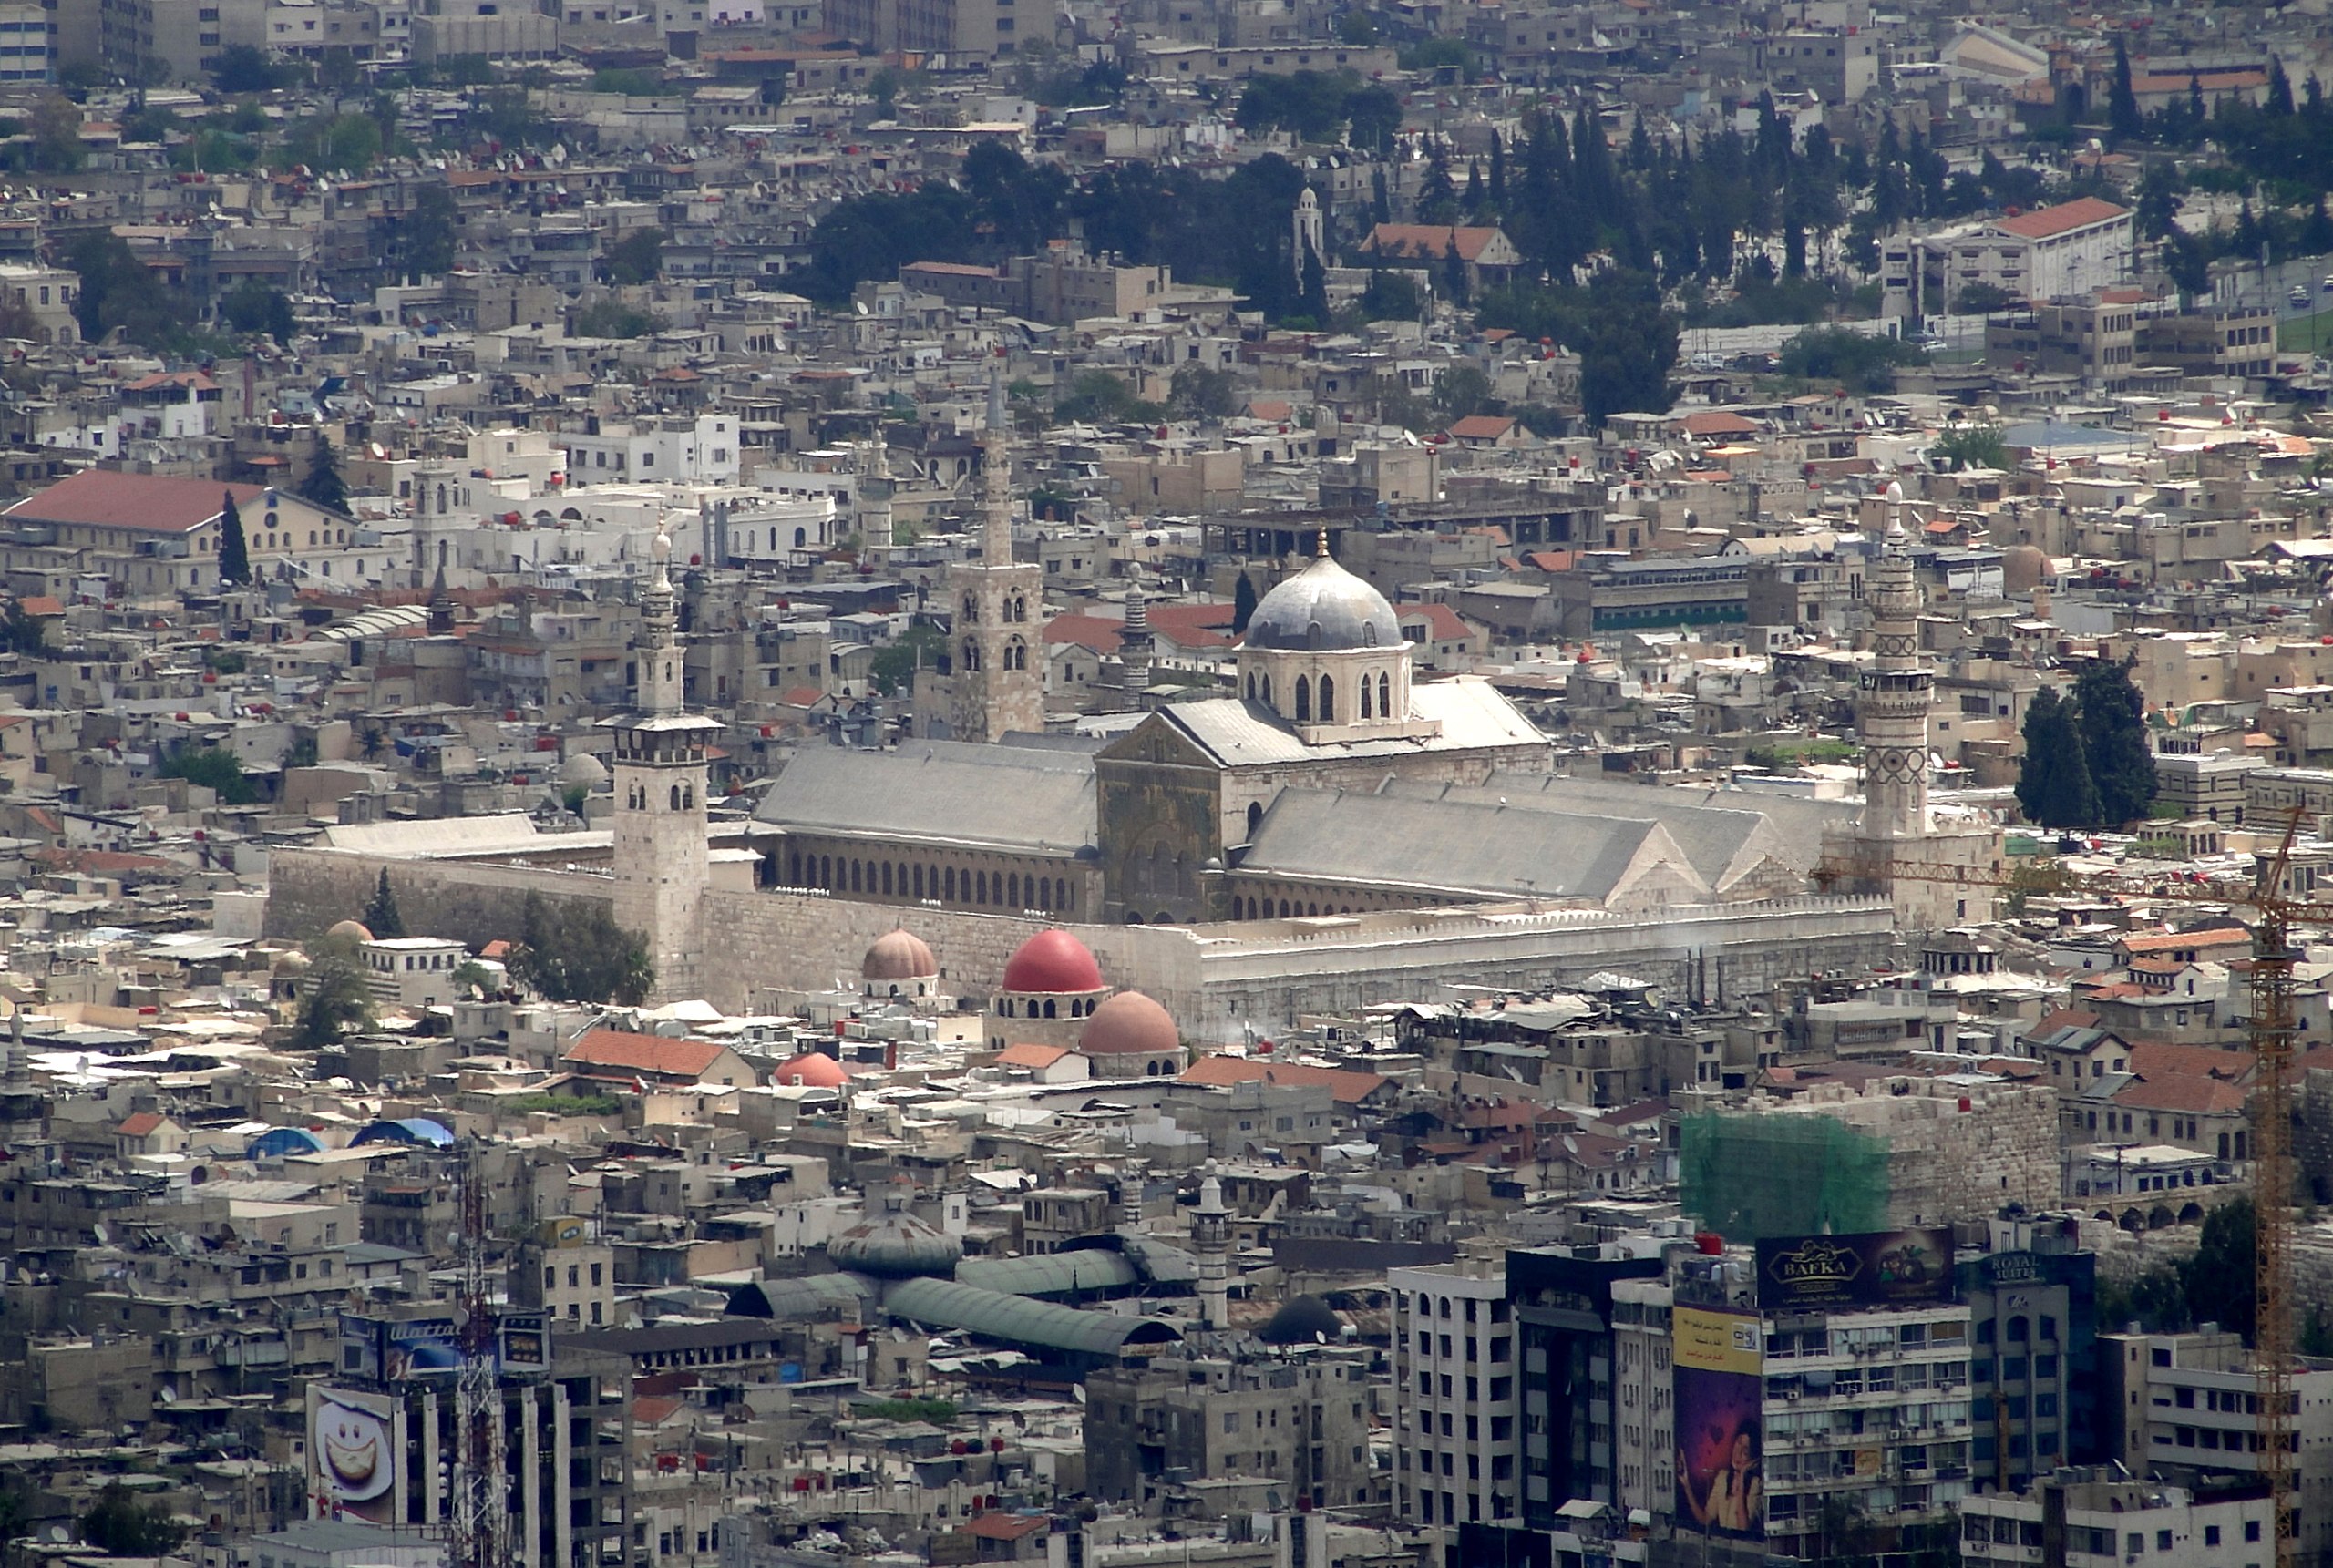 View of Damascus with the Umayyad Mosque in center